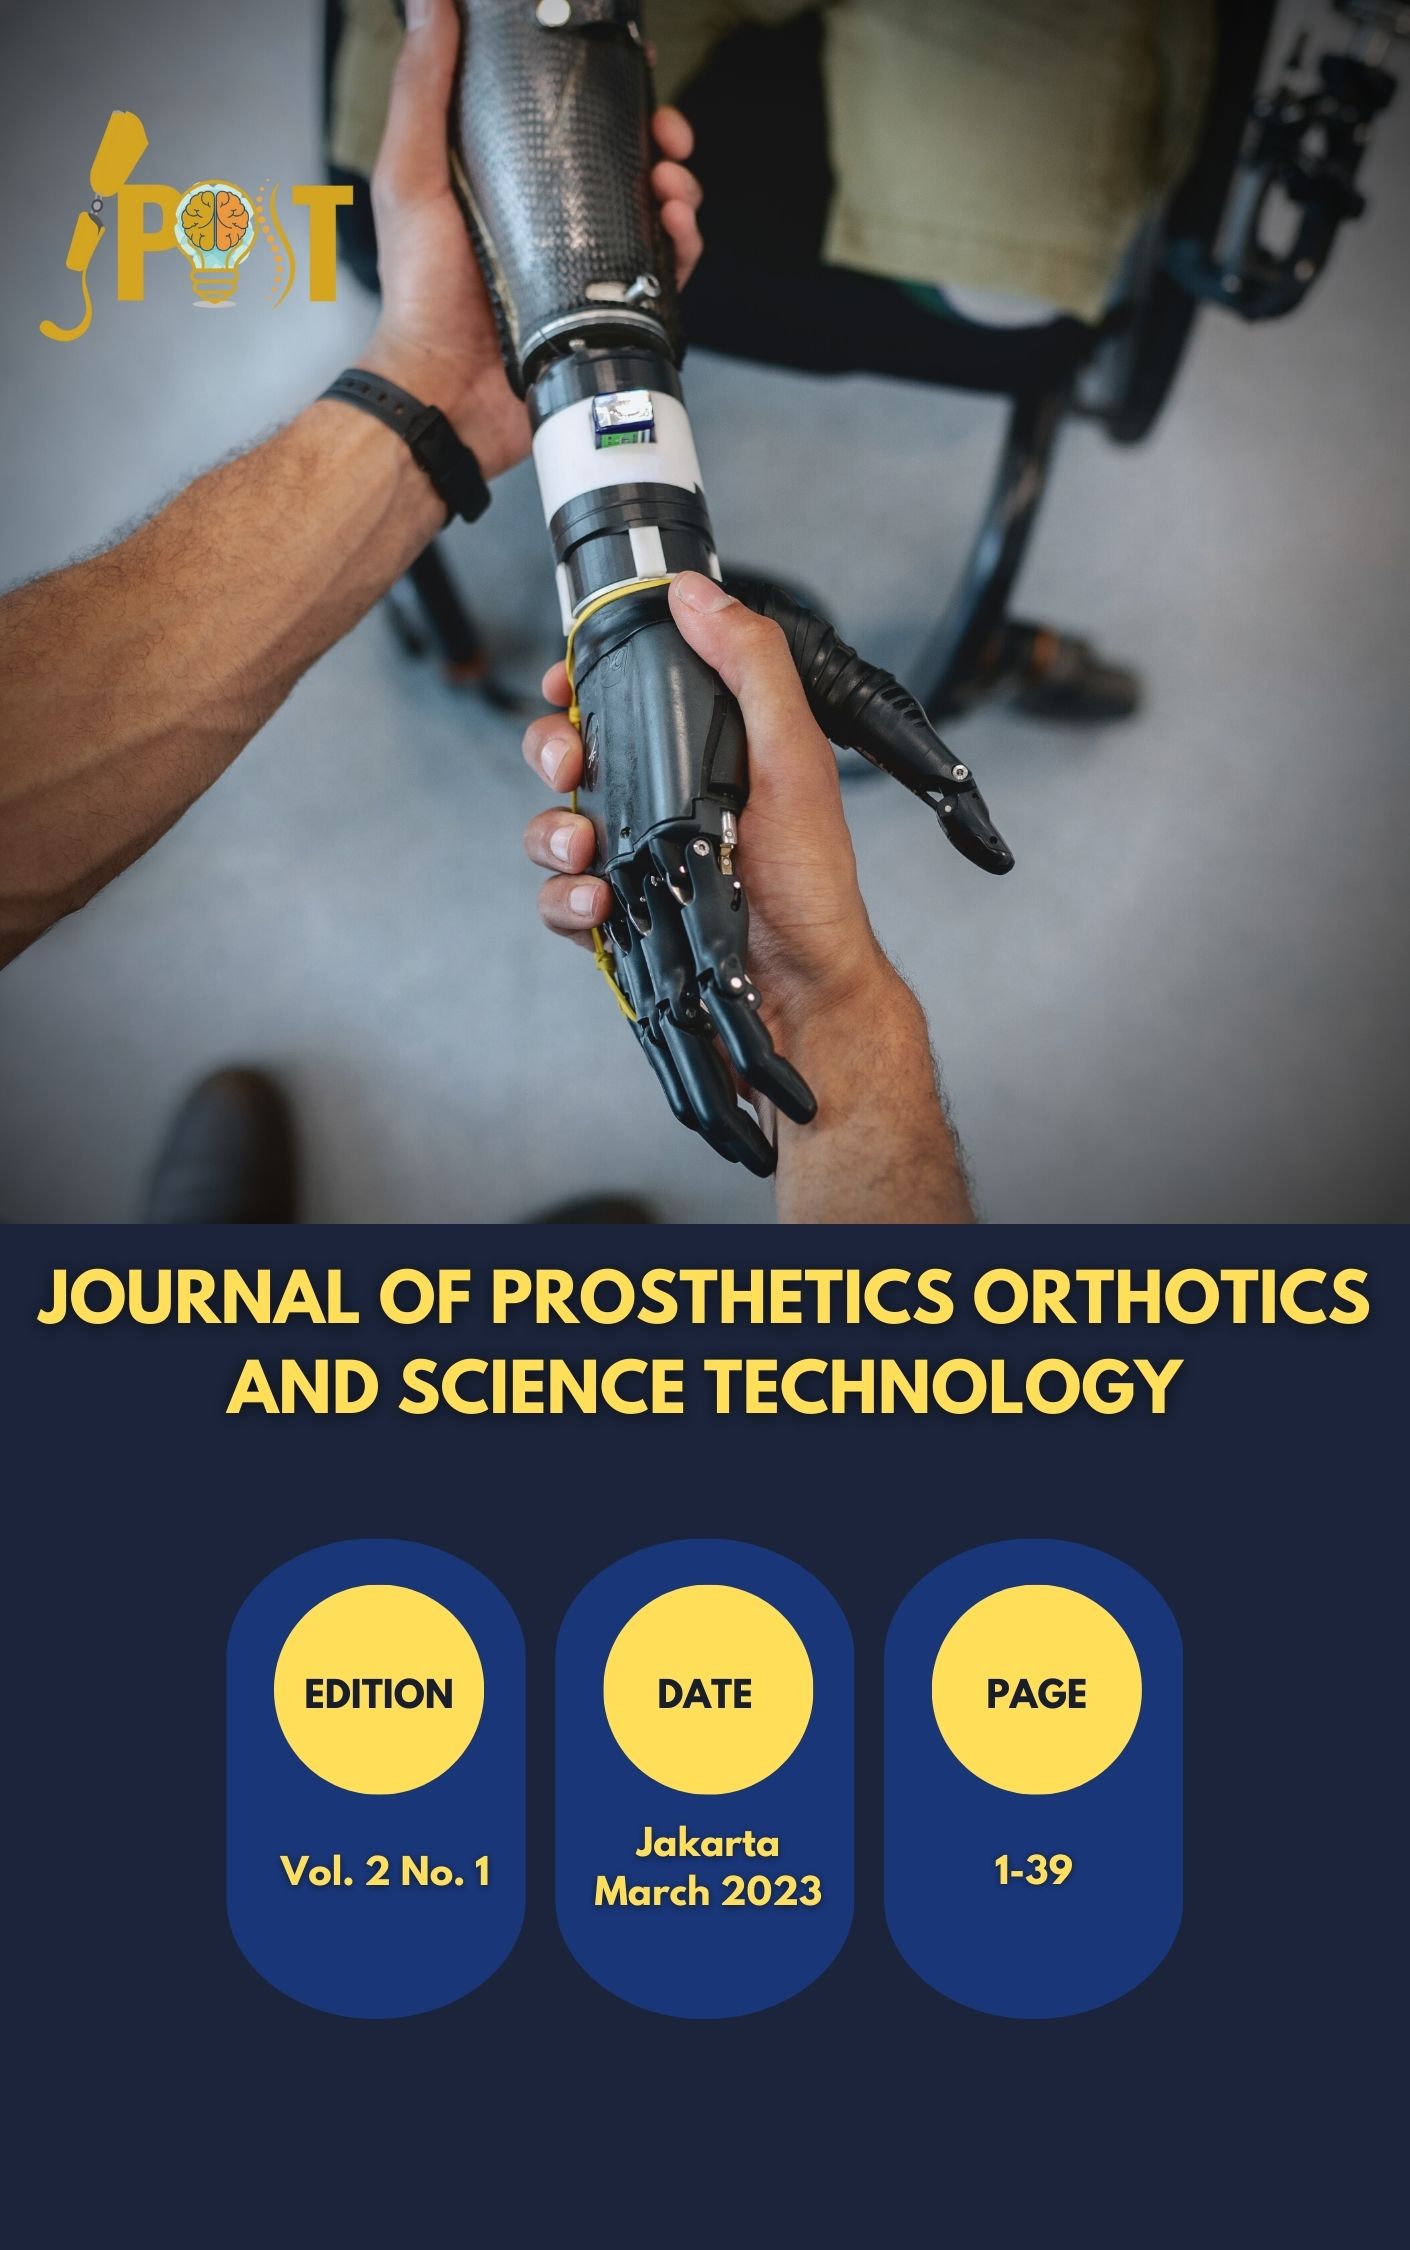 					View Vol. 2 No. 1 (2023): JPOST: JOURNAL OF PROSTHETICS ORTHOTICS AND SCIENCE TECHNOLOGY
				